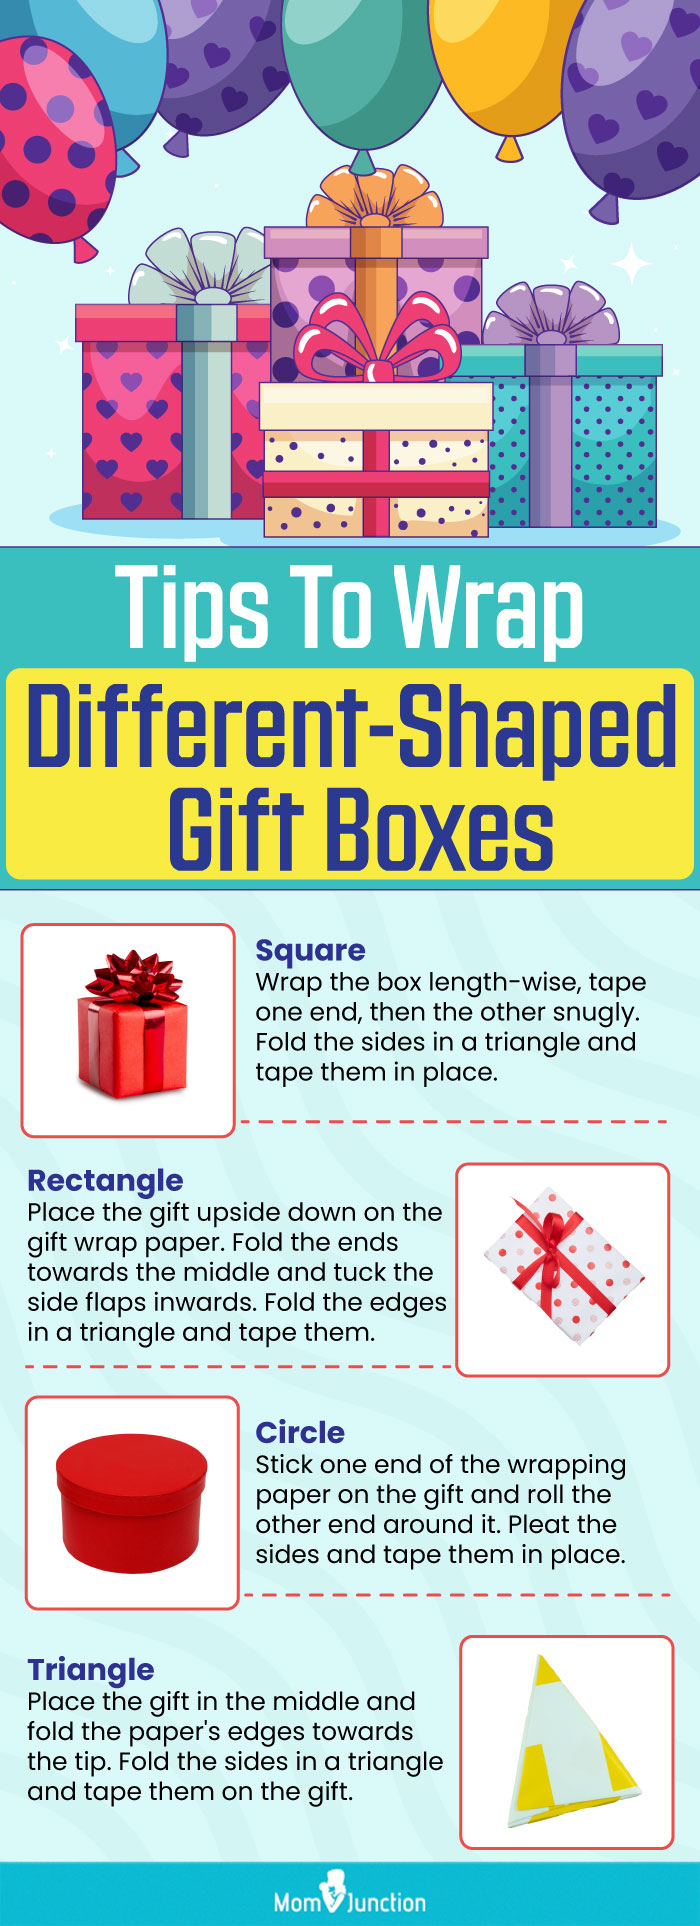 Tips To Wrap Different Shaped Gift Boxes(infographic)